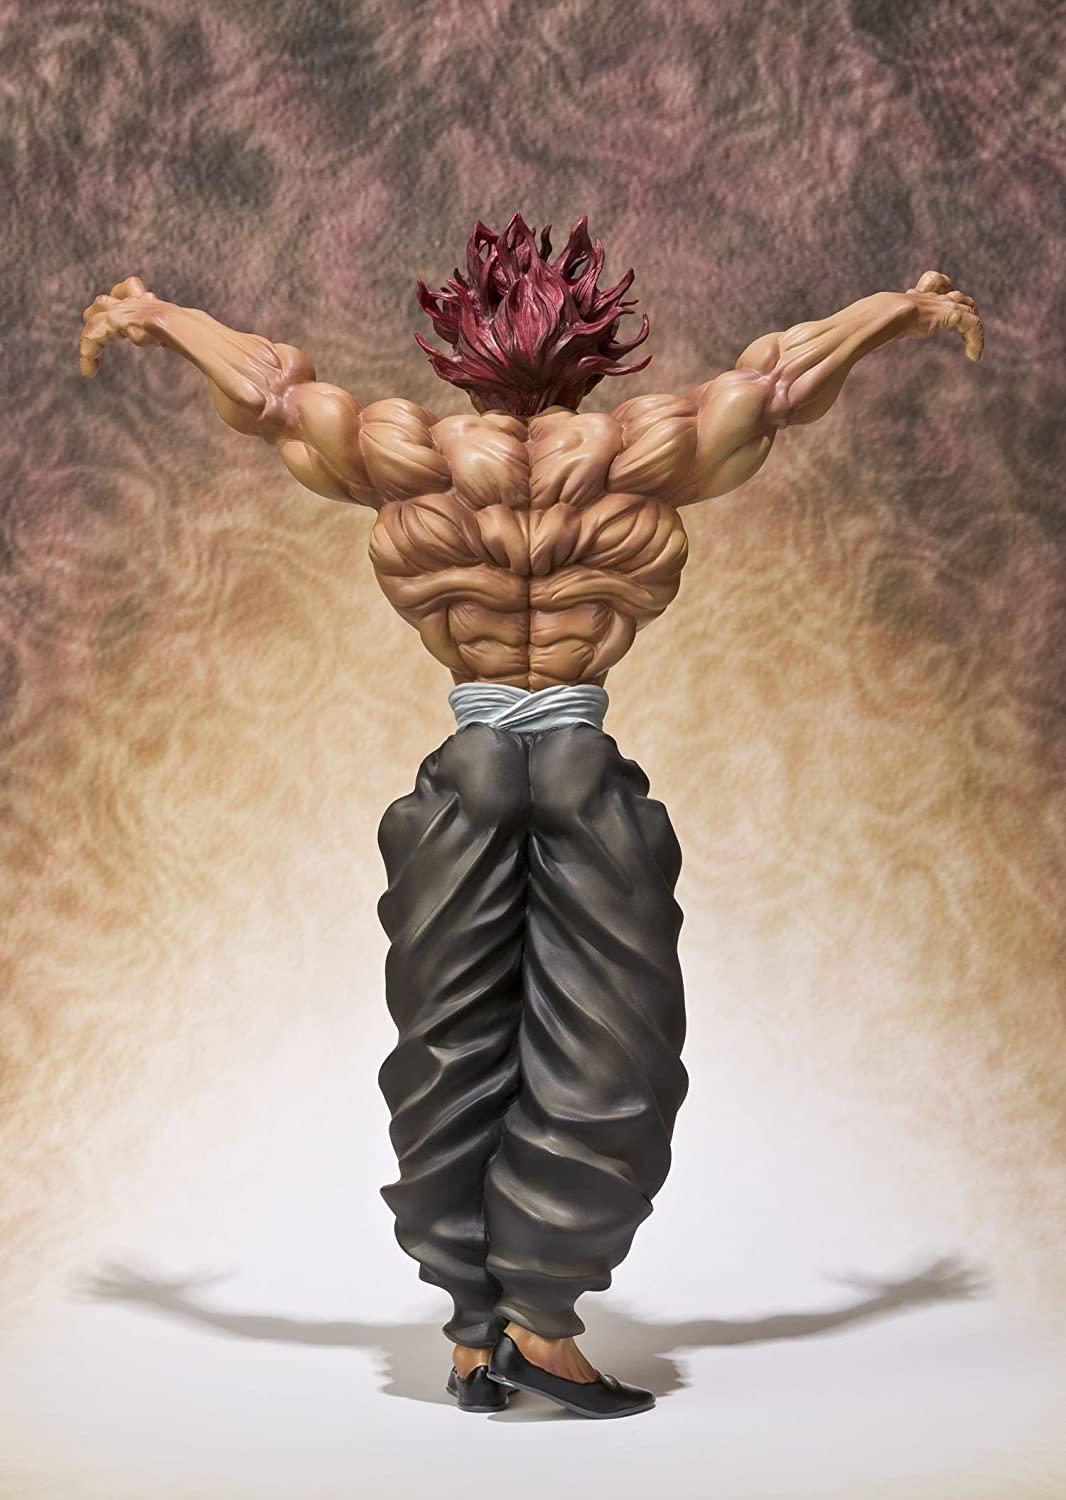 Baki Hanma Wallpapers Wallpaper Cave His muscles are strong and dense enough to absorb the impact. baki hanma wallpapers wallpaper cave